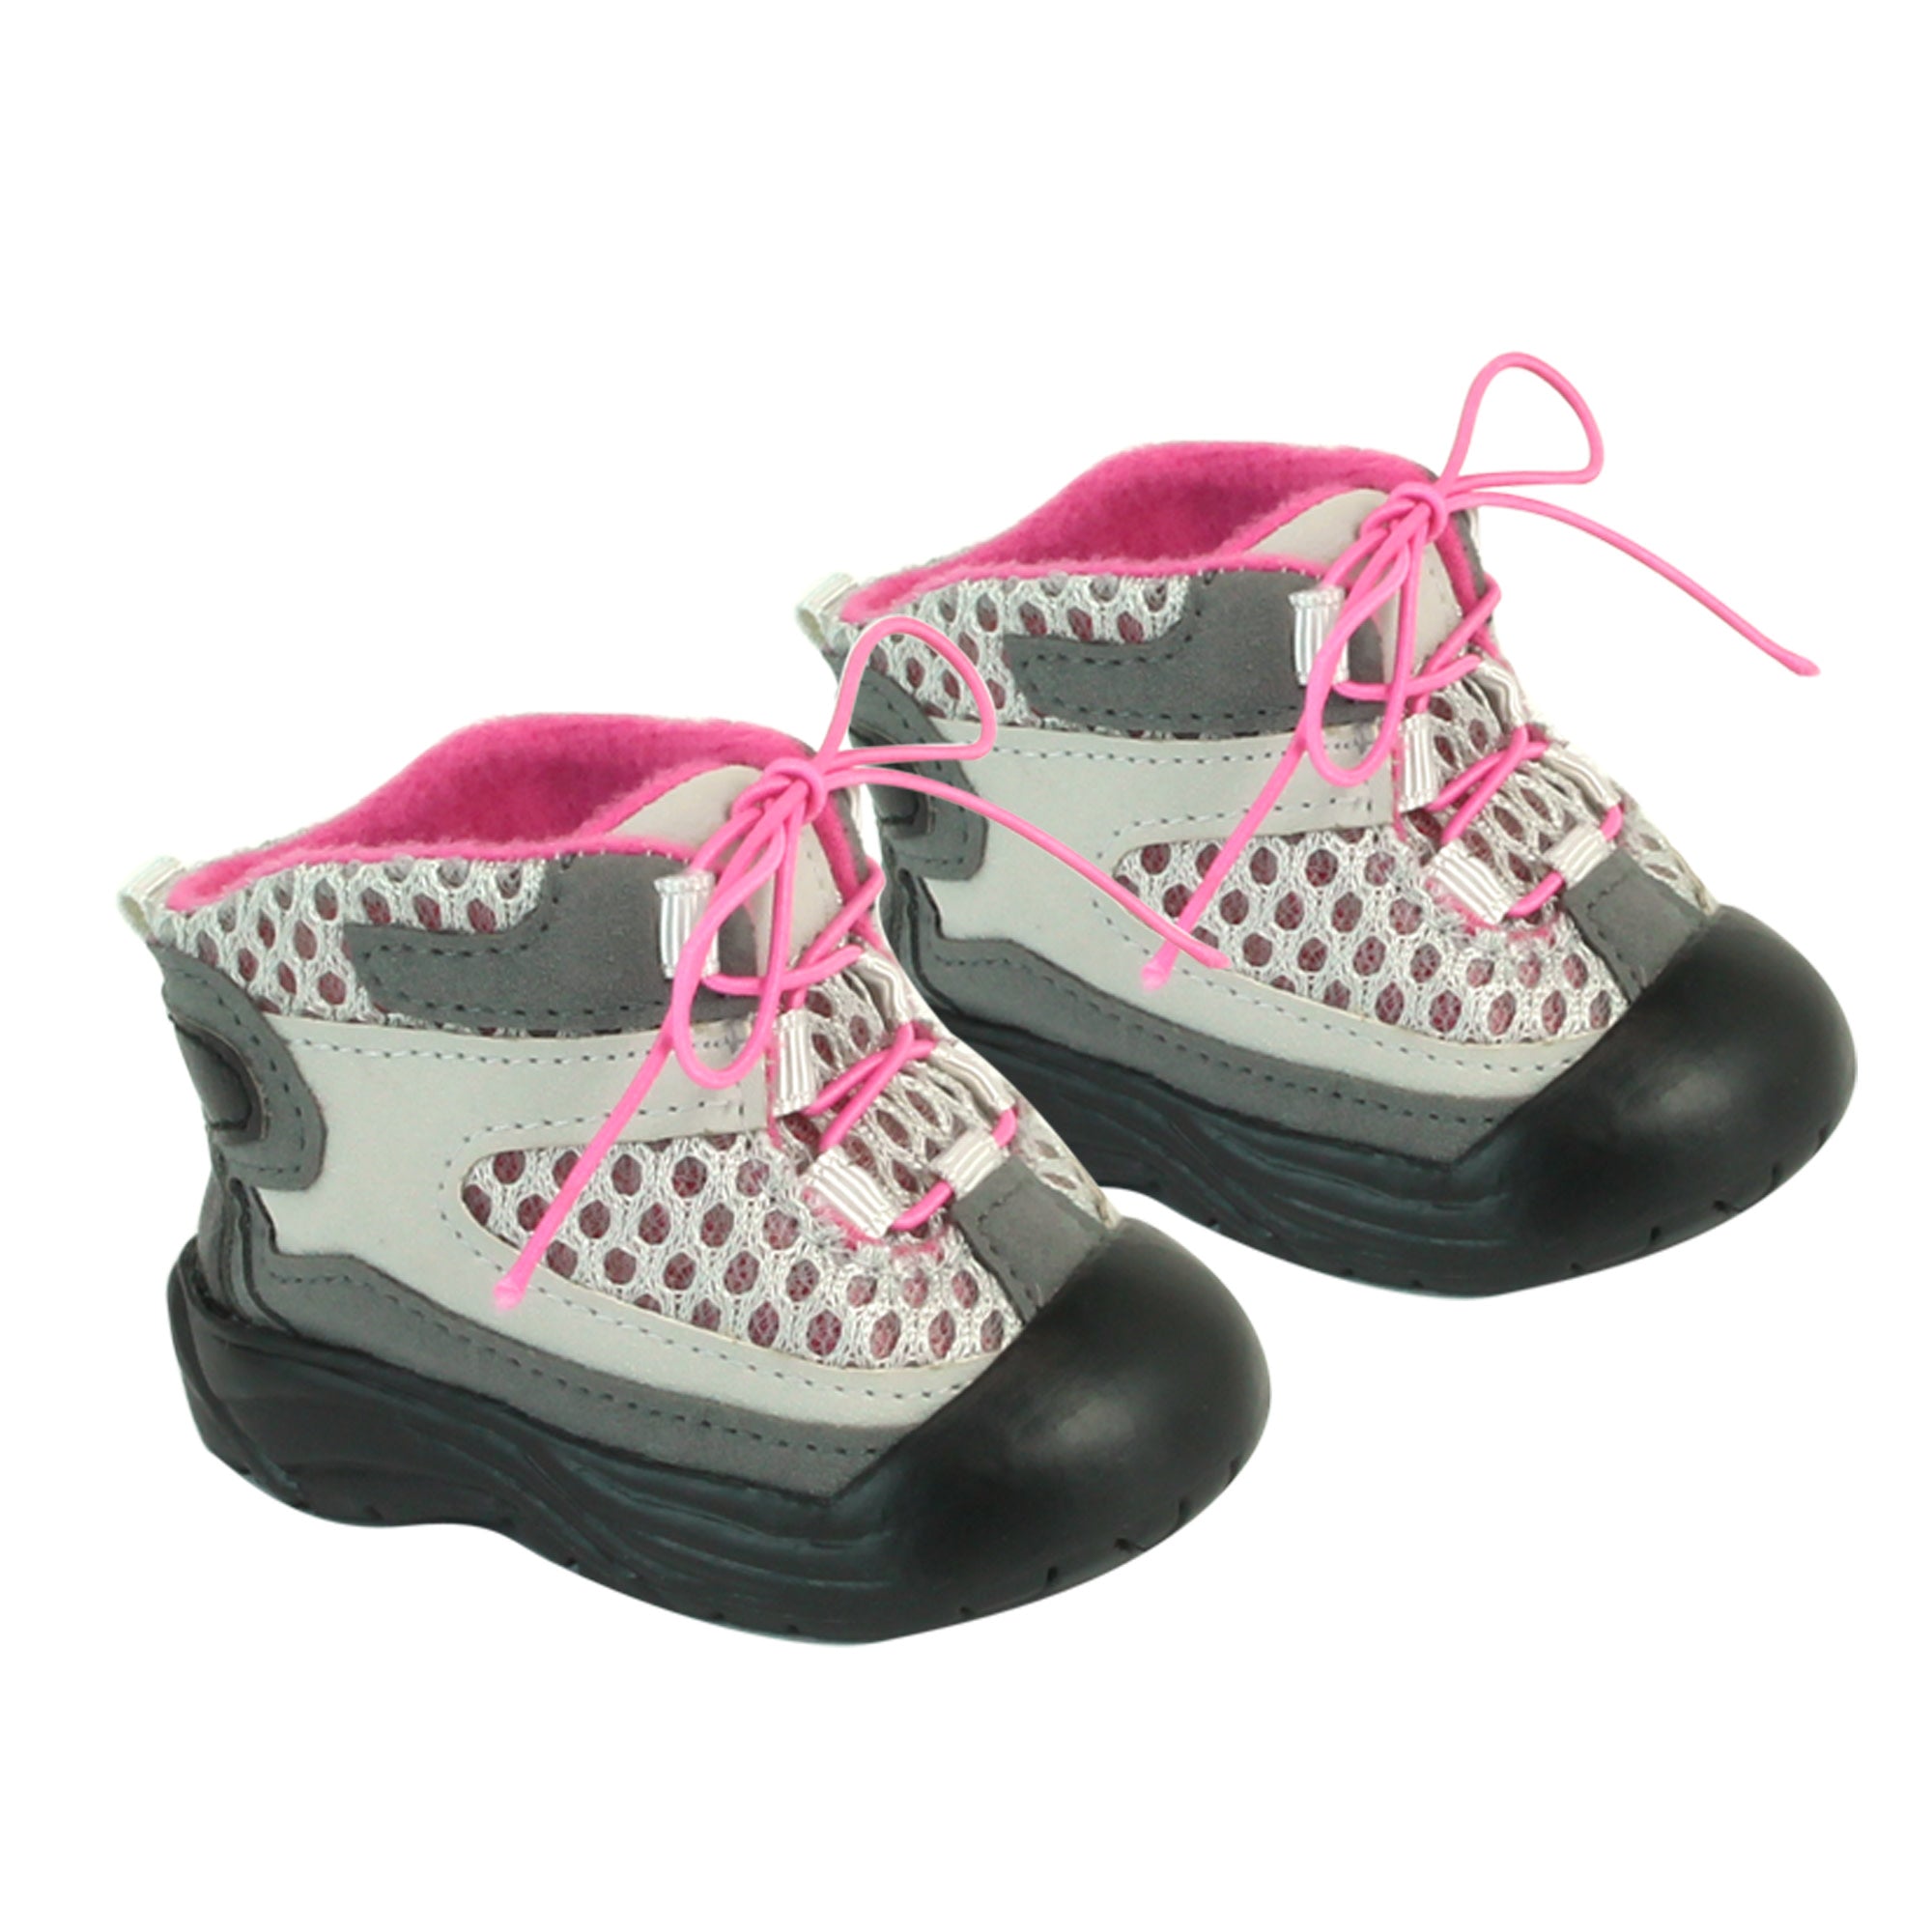 Sophia’s Realistic High-Top Breathable Hiking Boot Sneakers with Hot Pink Fleece Lining & Matching Shoelaces for 18” Dolls, Gray